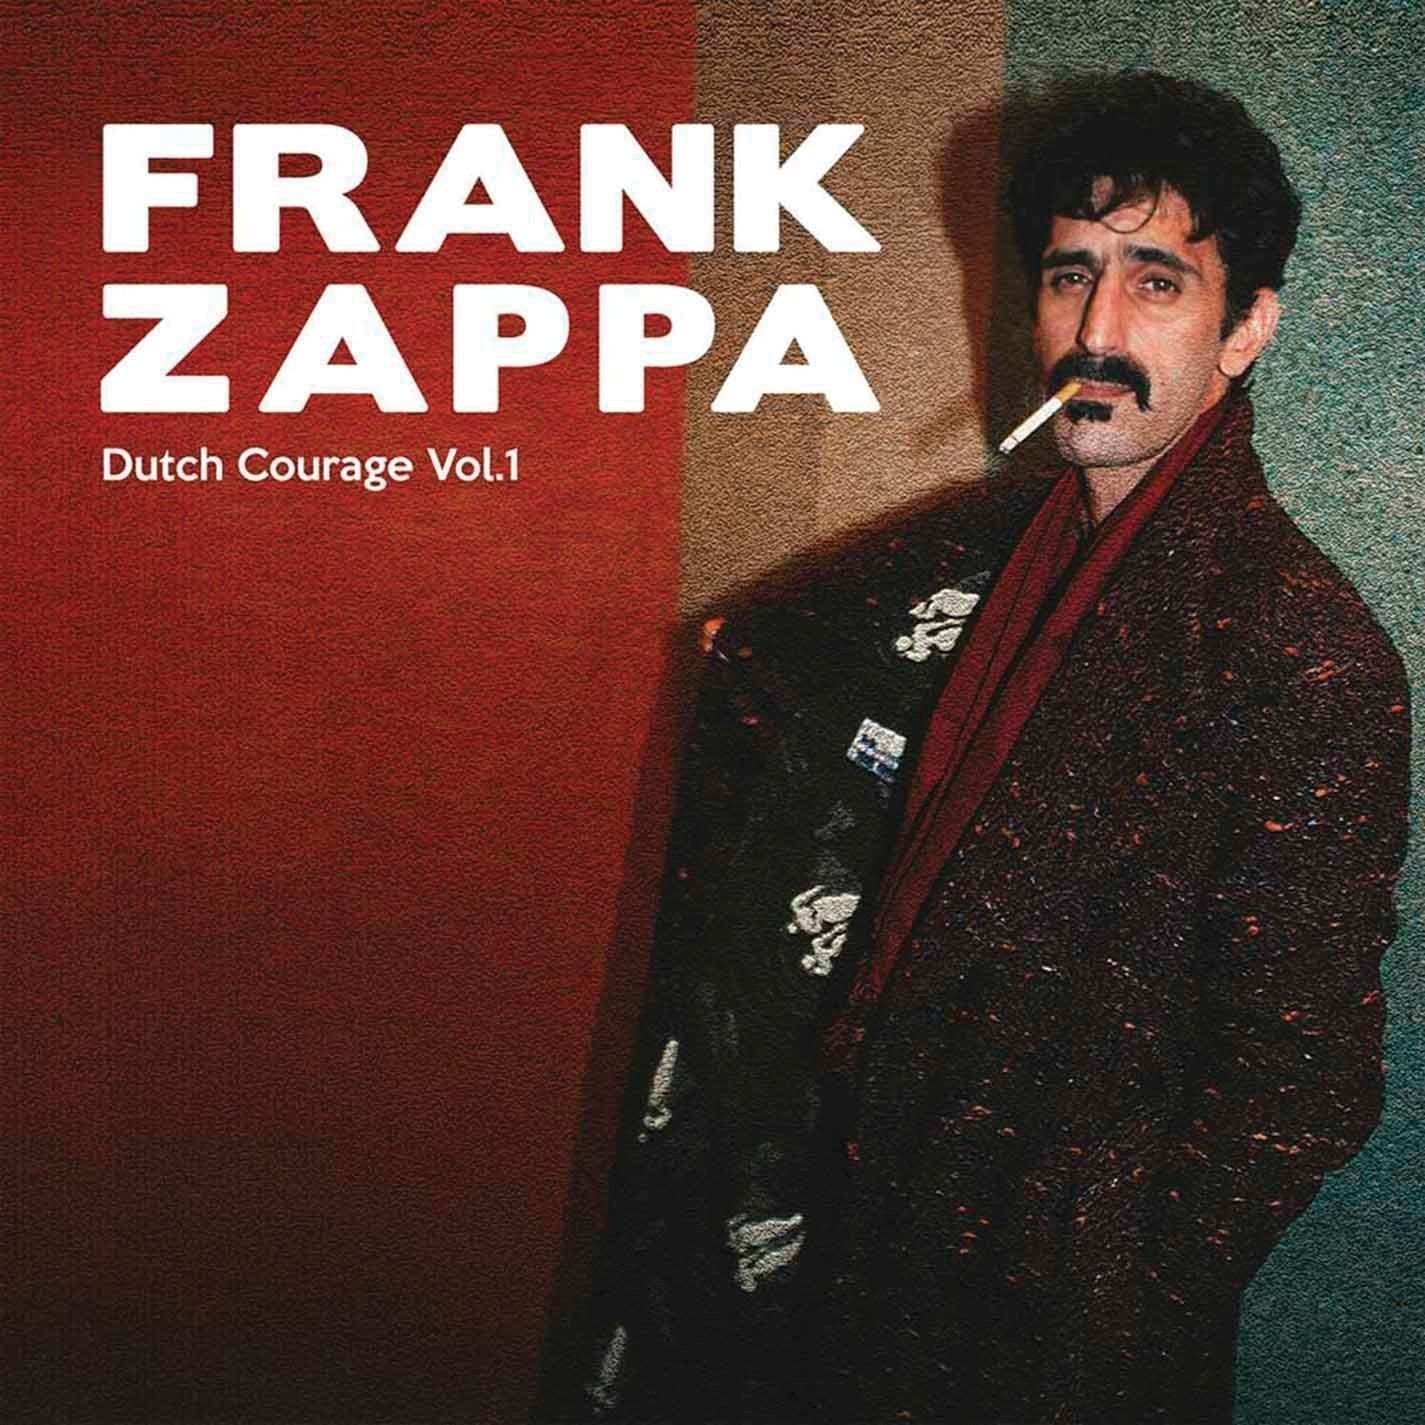 Disco in vinile Frank Zappa - Dutch Courage Vol. 1 (Frank Zappa & The Mothers Of Invention) (2 LP)